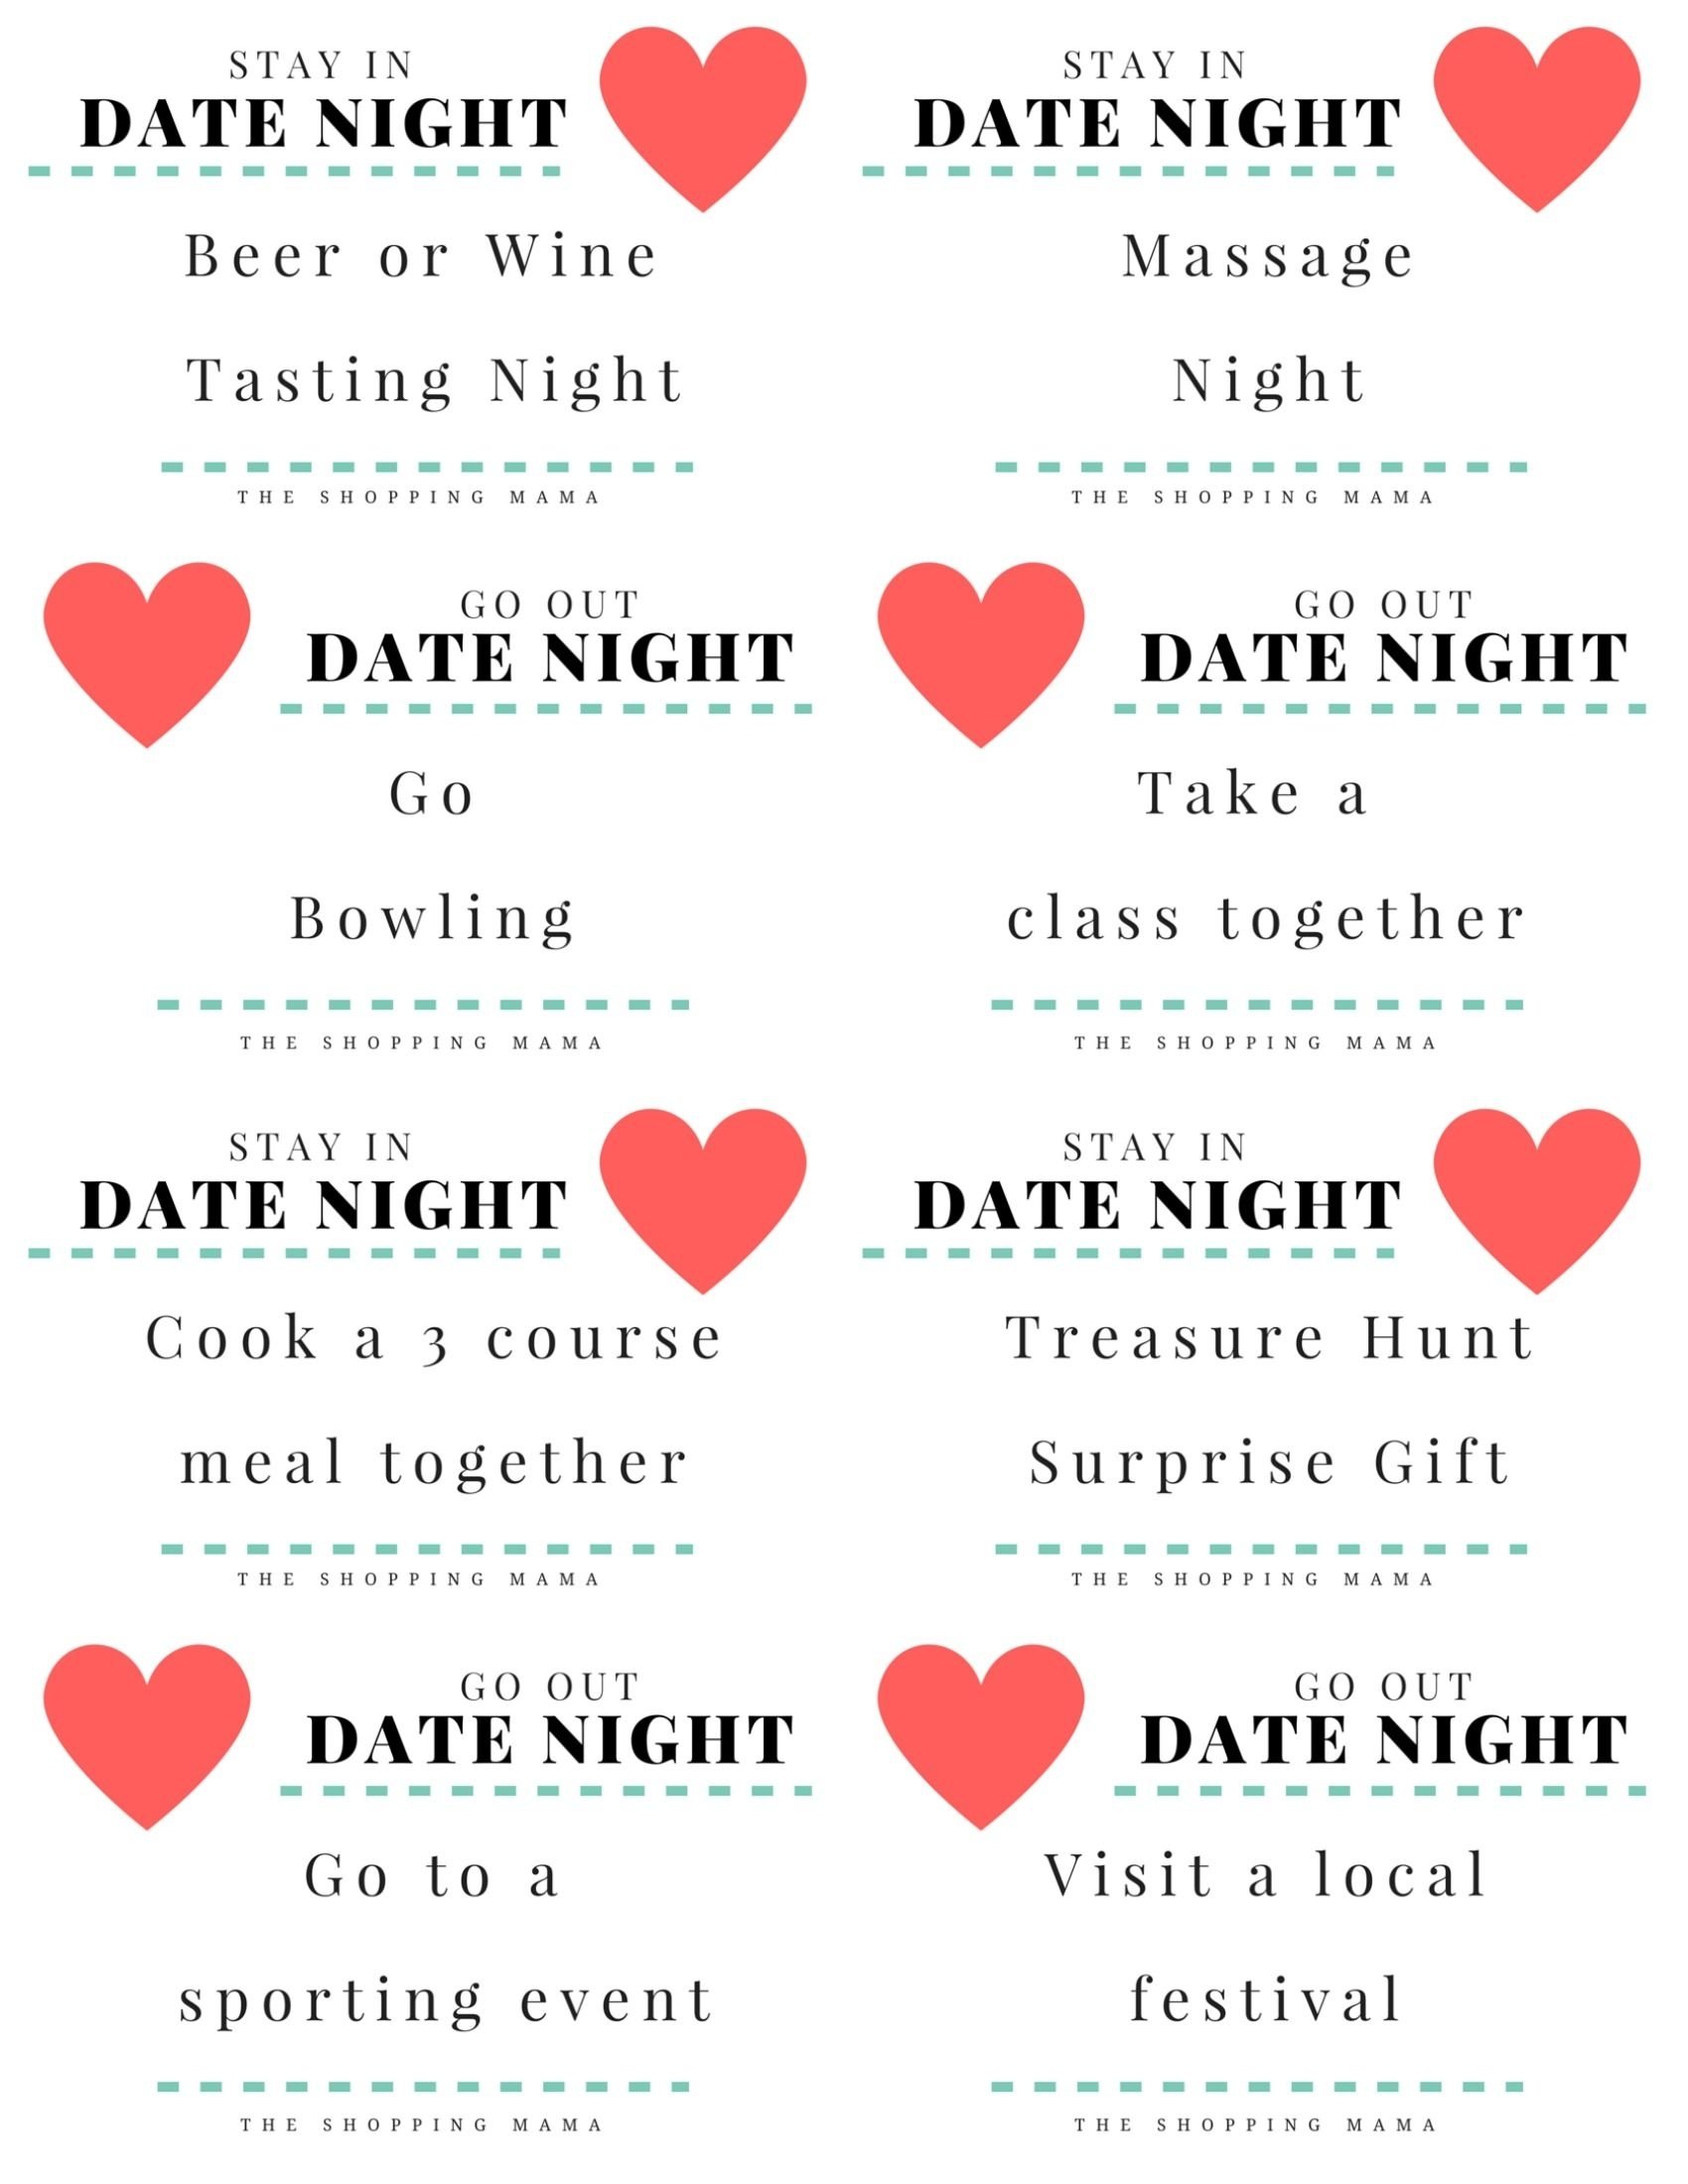 10 Fabulous Ideas For A Date Night 12 months of date night ideas printables 12 months and planners 2022